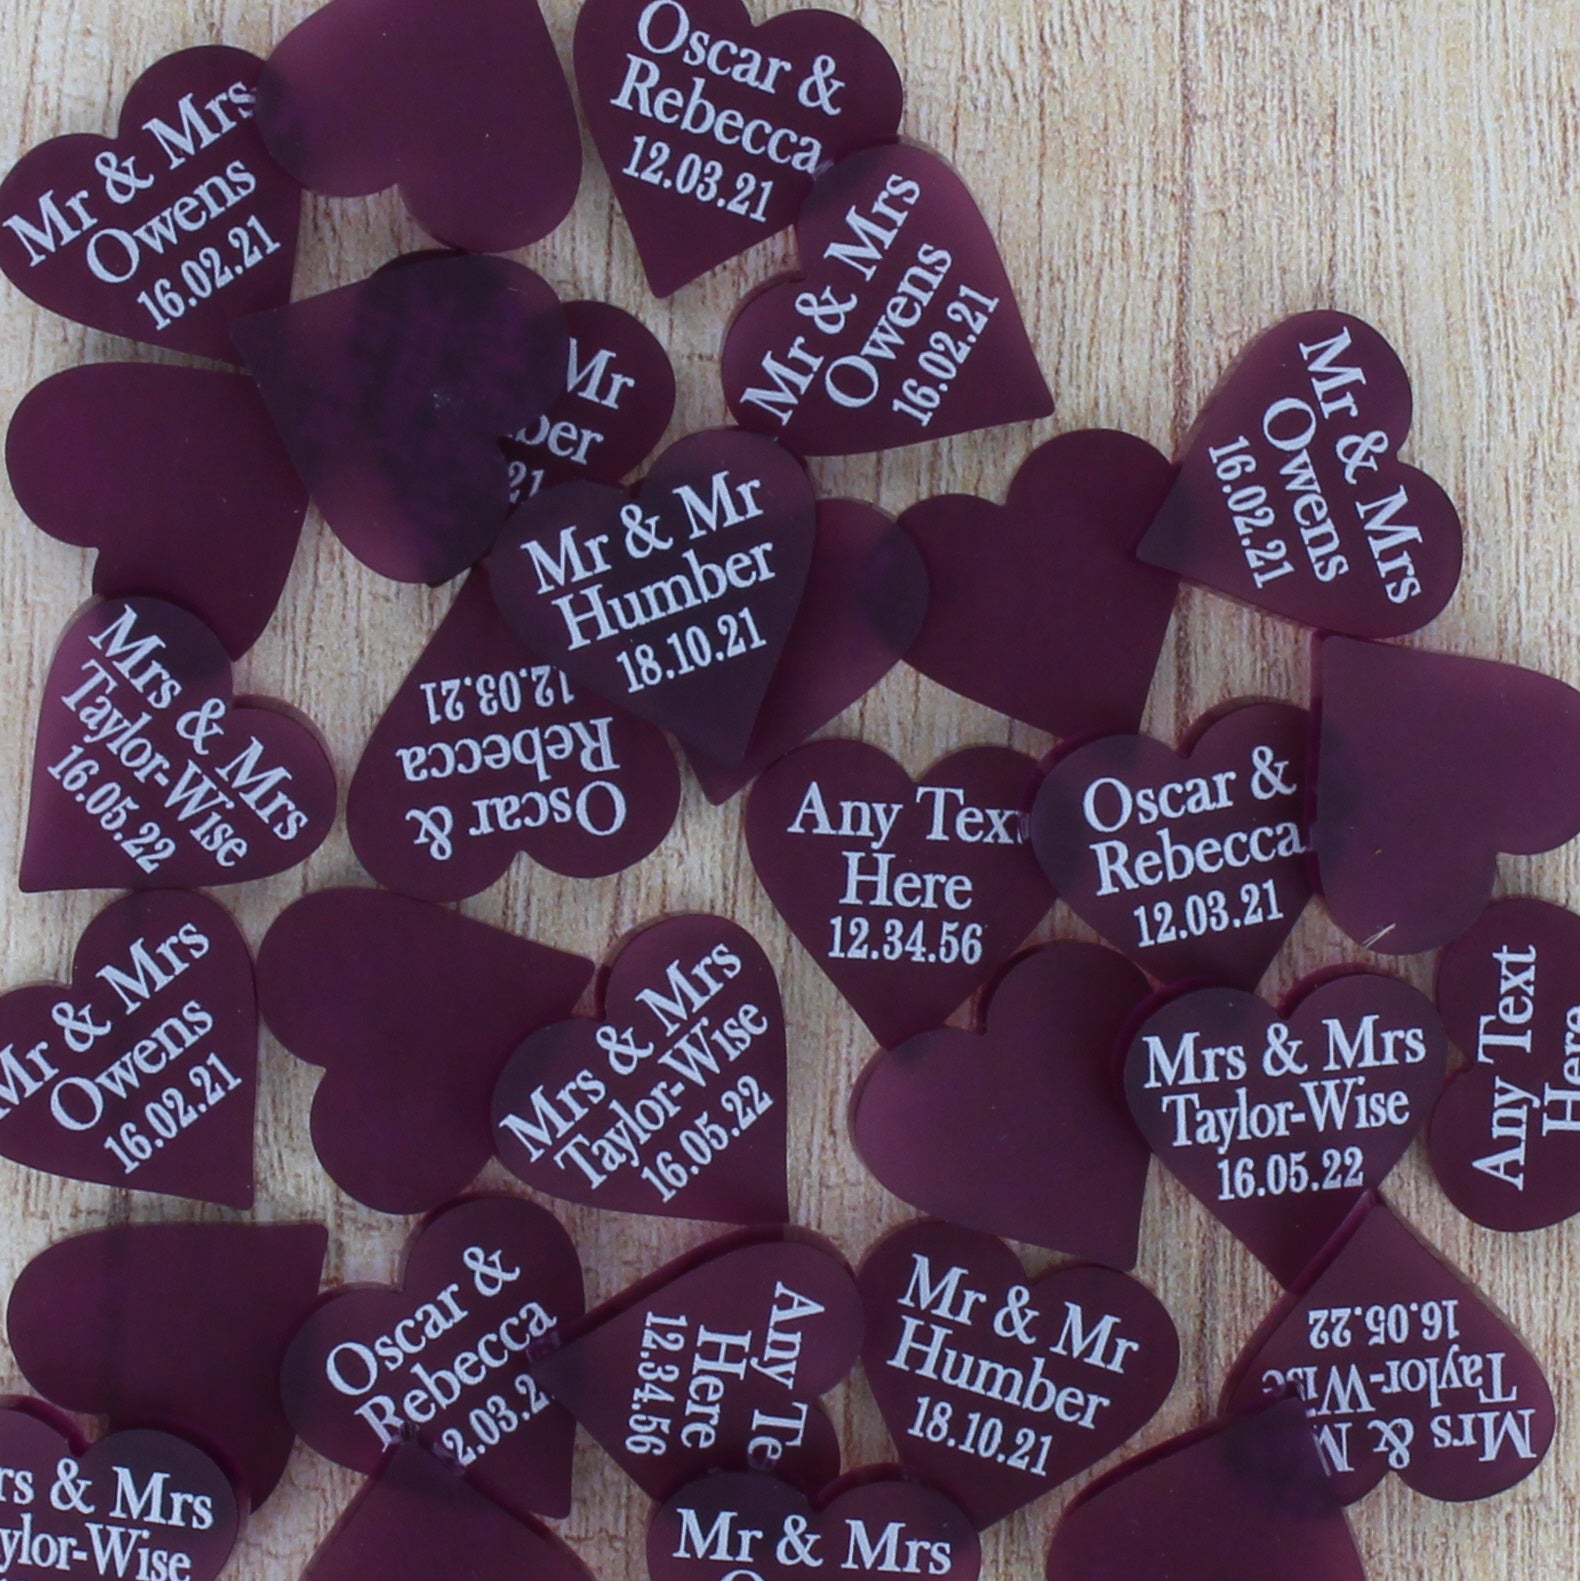 Personalised Wedding Favours - Frosted Plum Acrylic Love Hearts